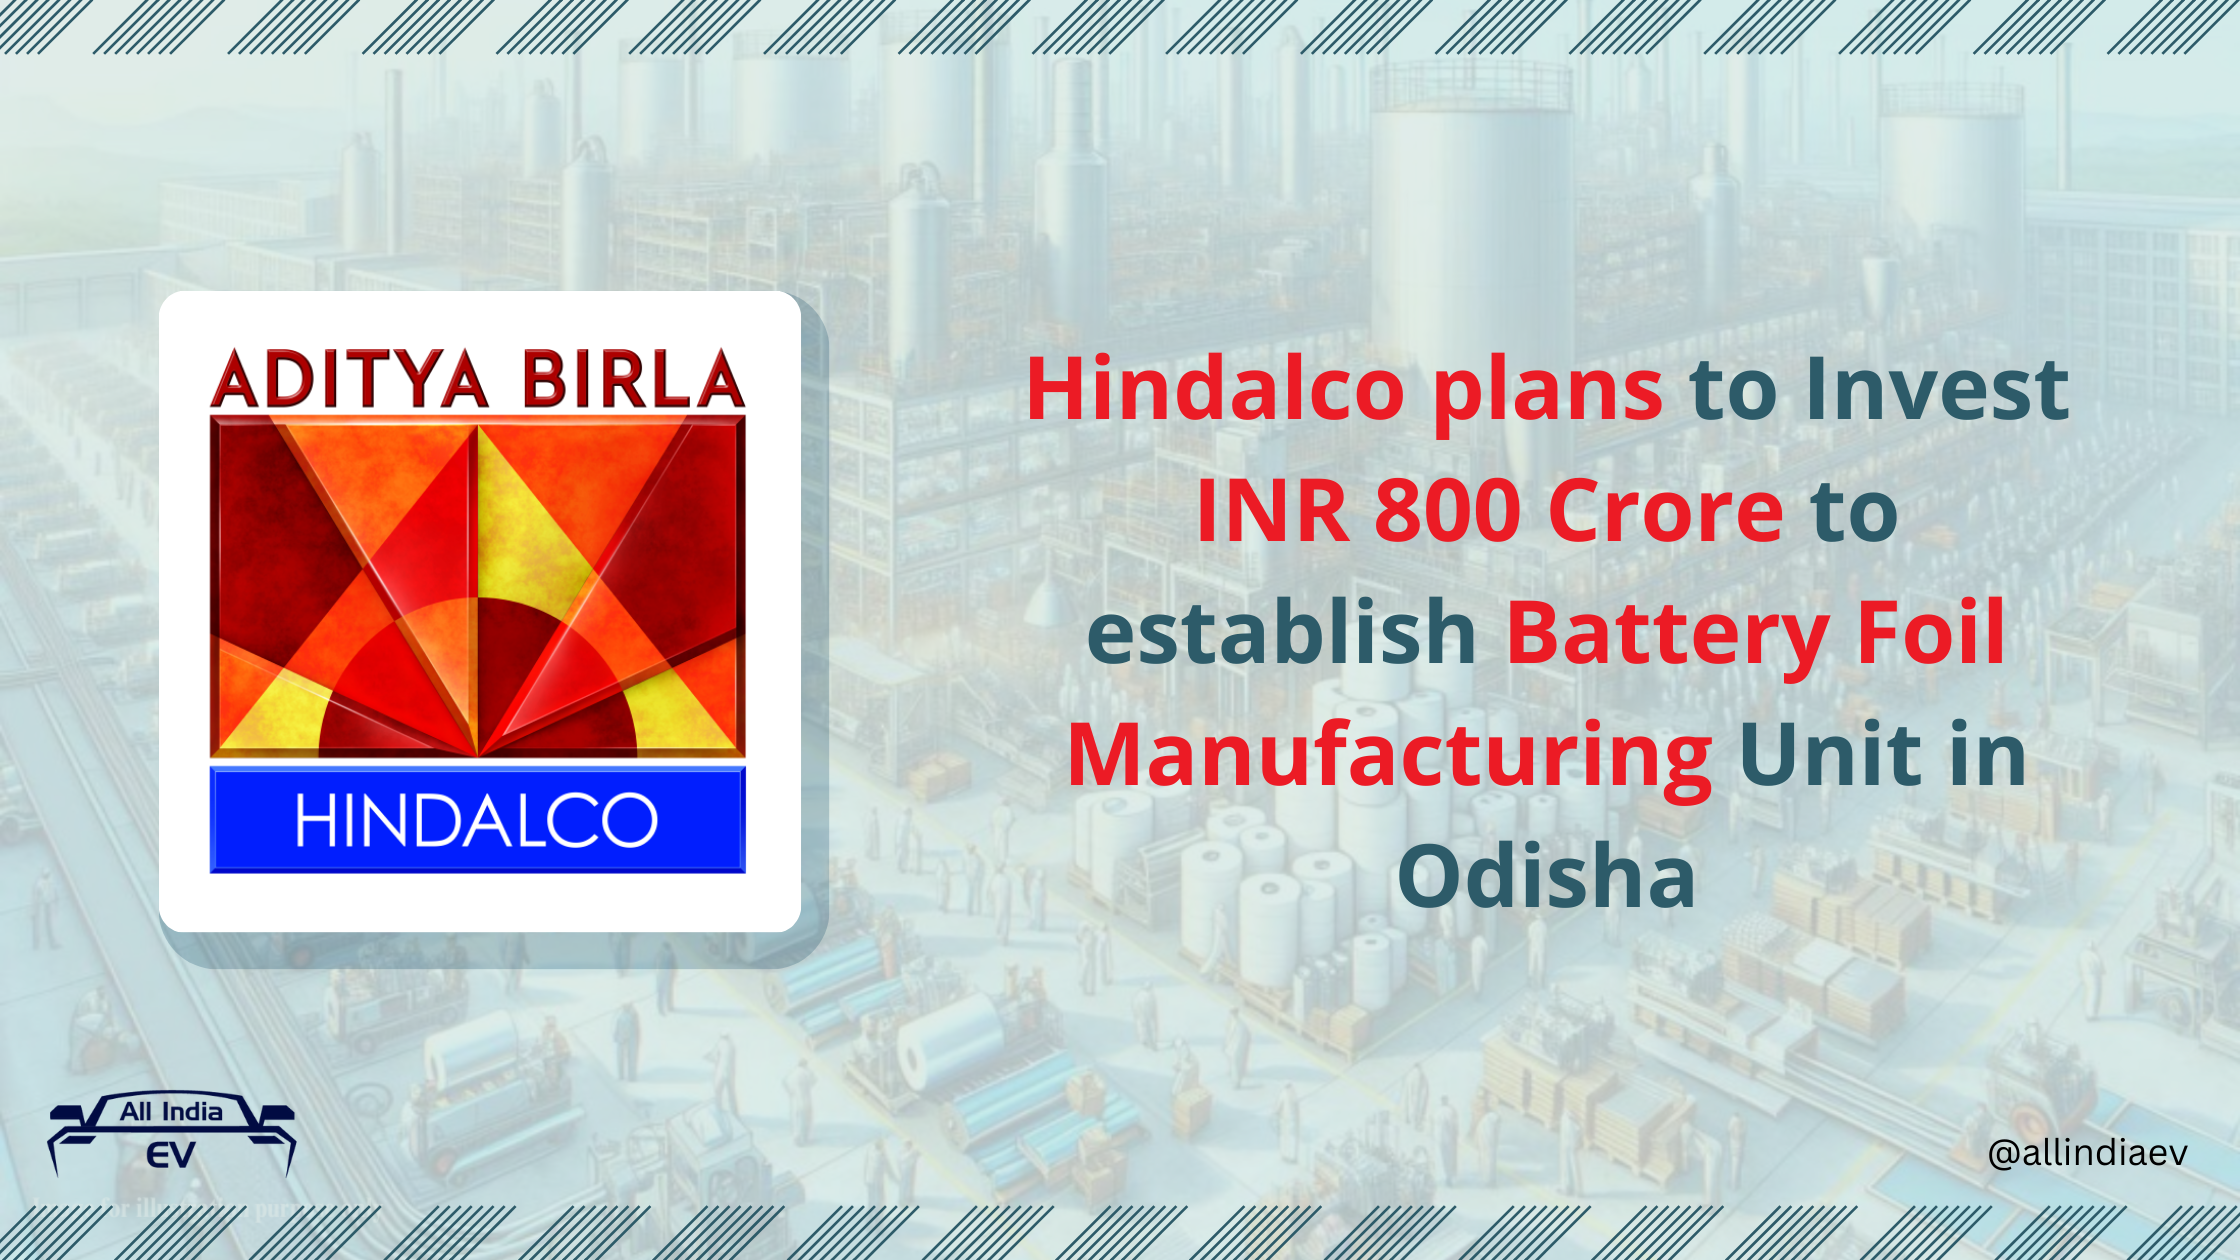 Hindalco plans to Invest INR 800 Crore to establish Battery Foil Manufacturing Unit in Odisha